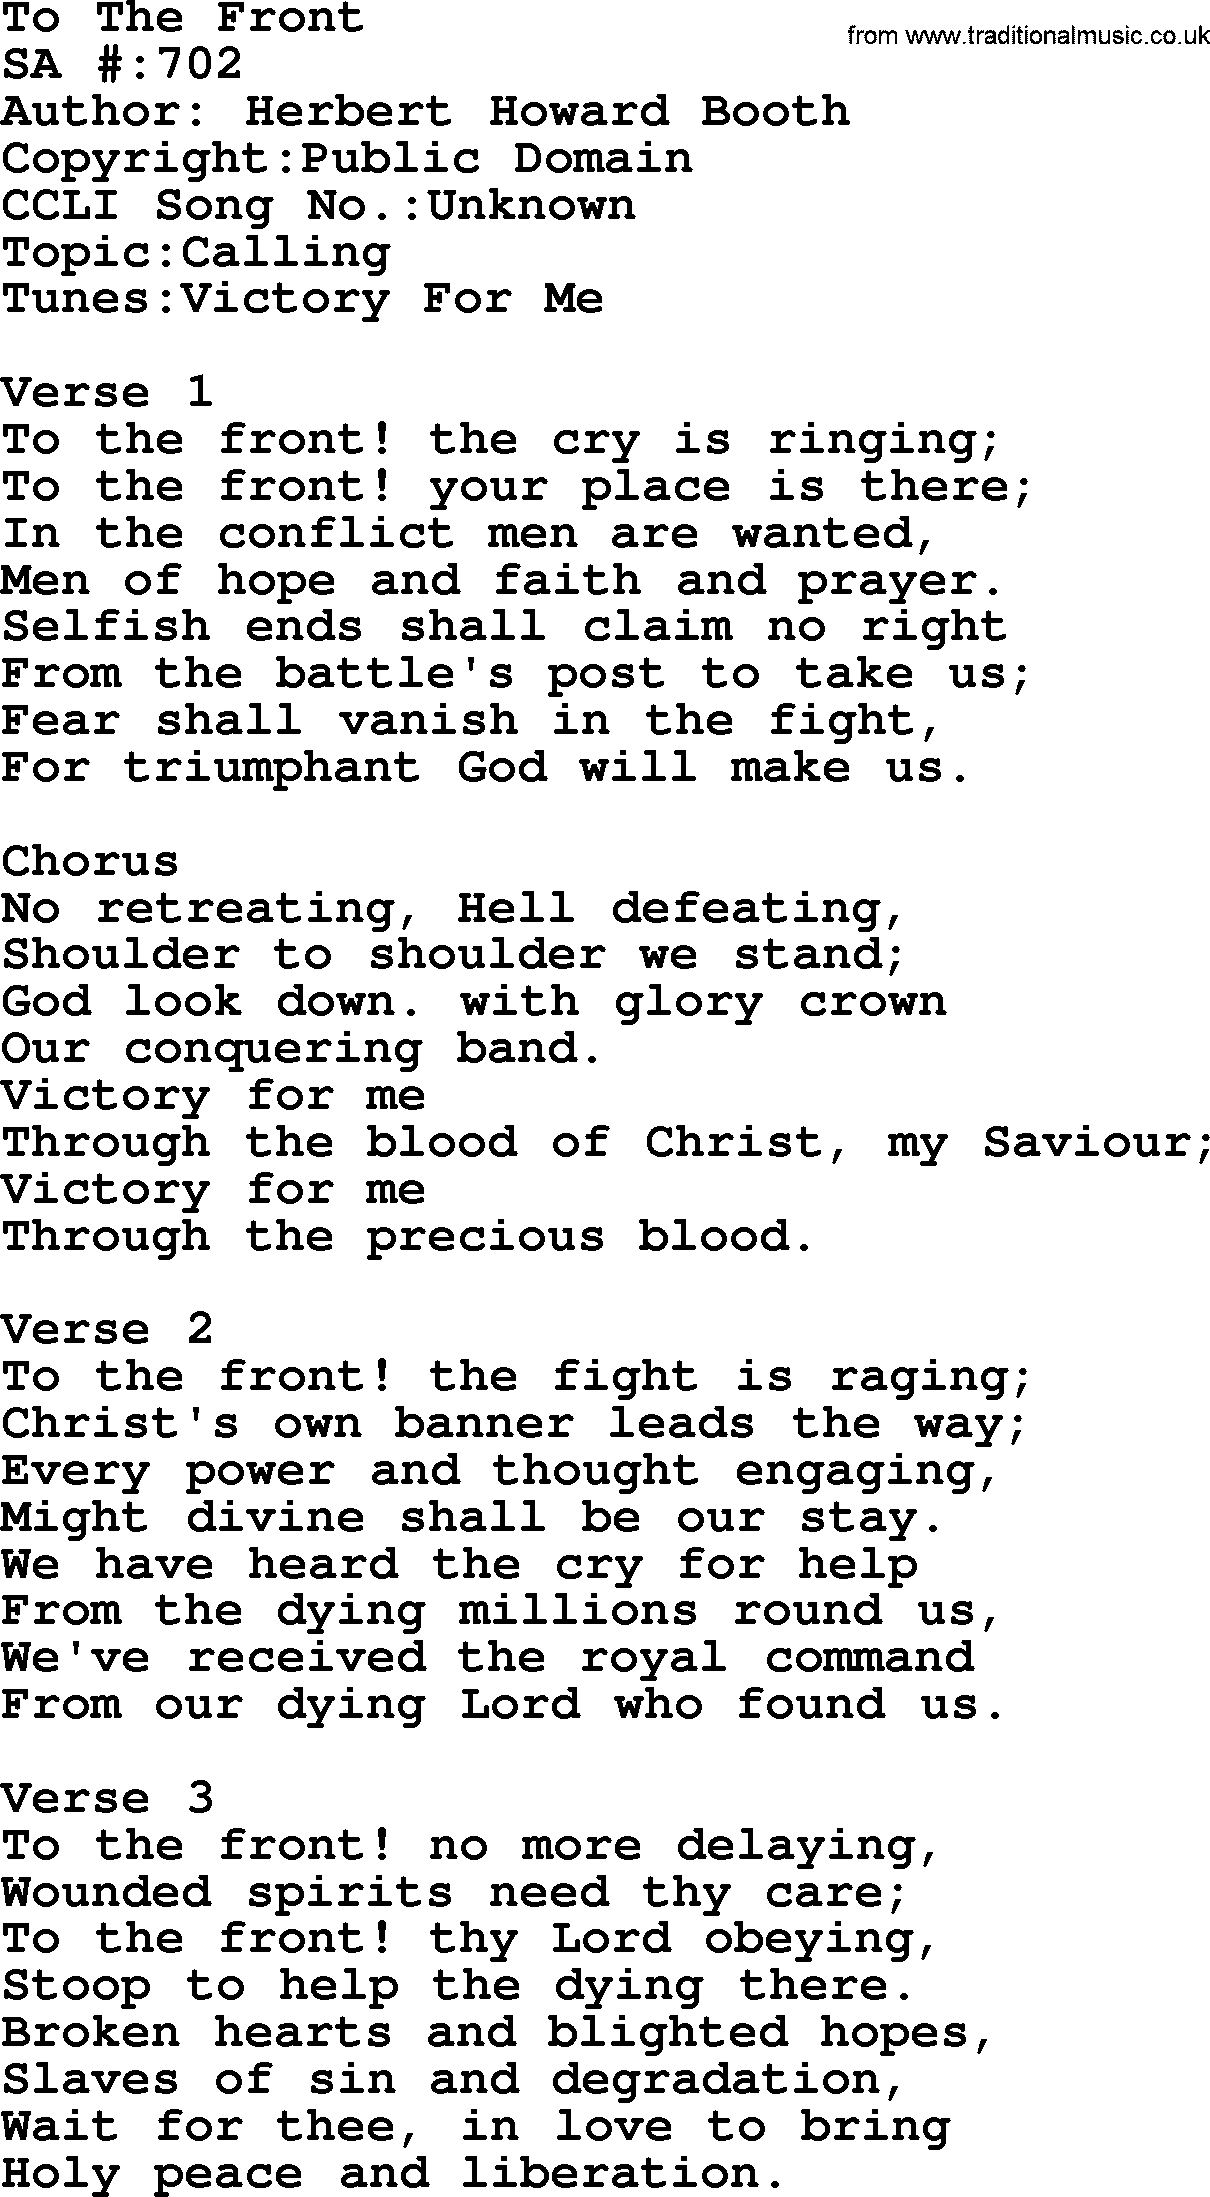 Salvation Army Hymnal, title: To The Front, with lyrics and PDF,